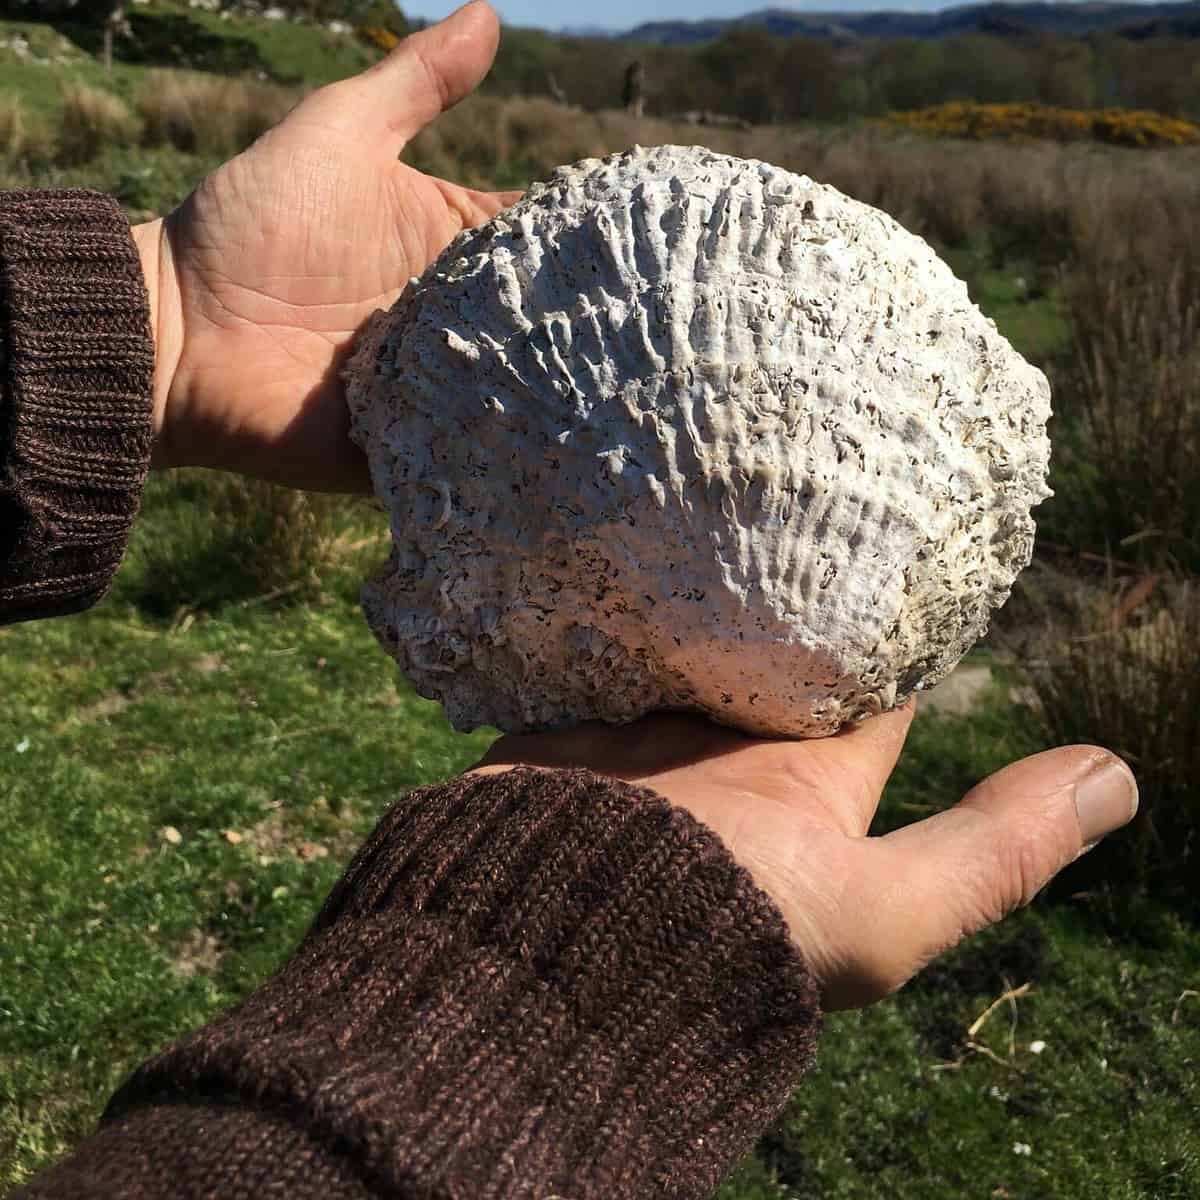 Large native oyster shell (Image credit: Operation Oyster/BSAC)